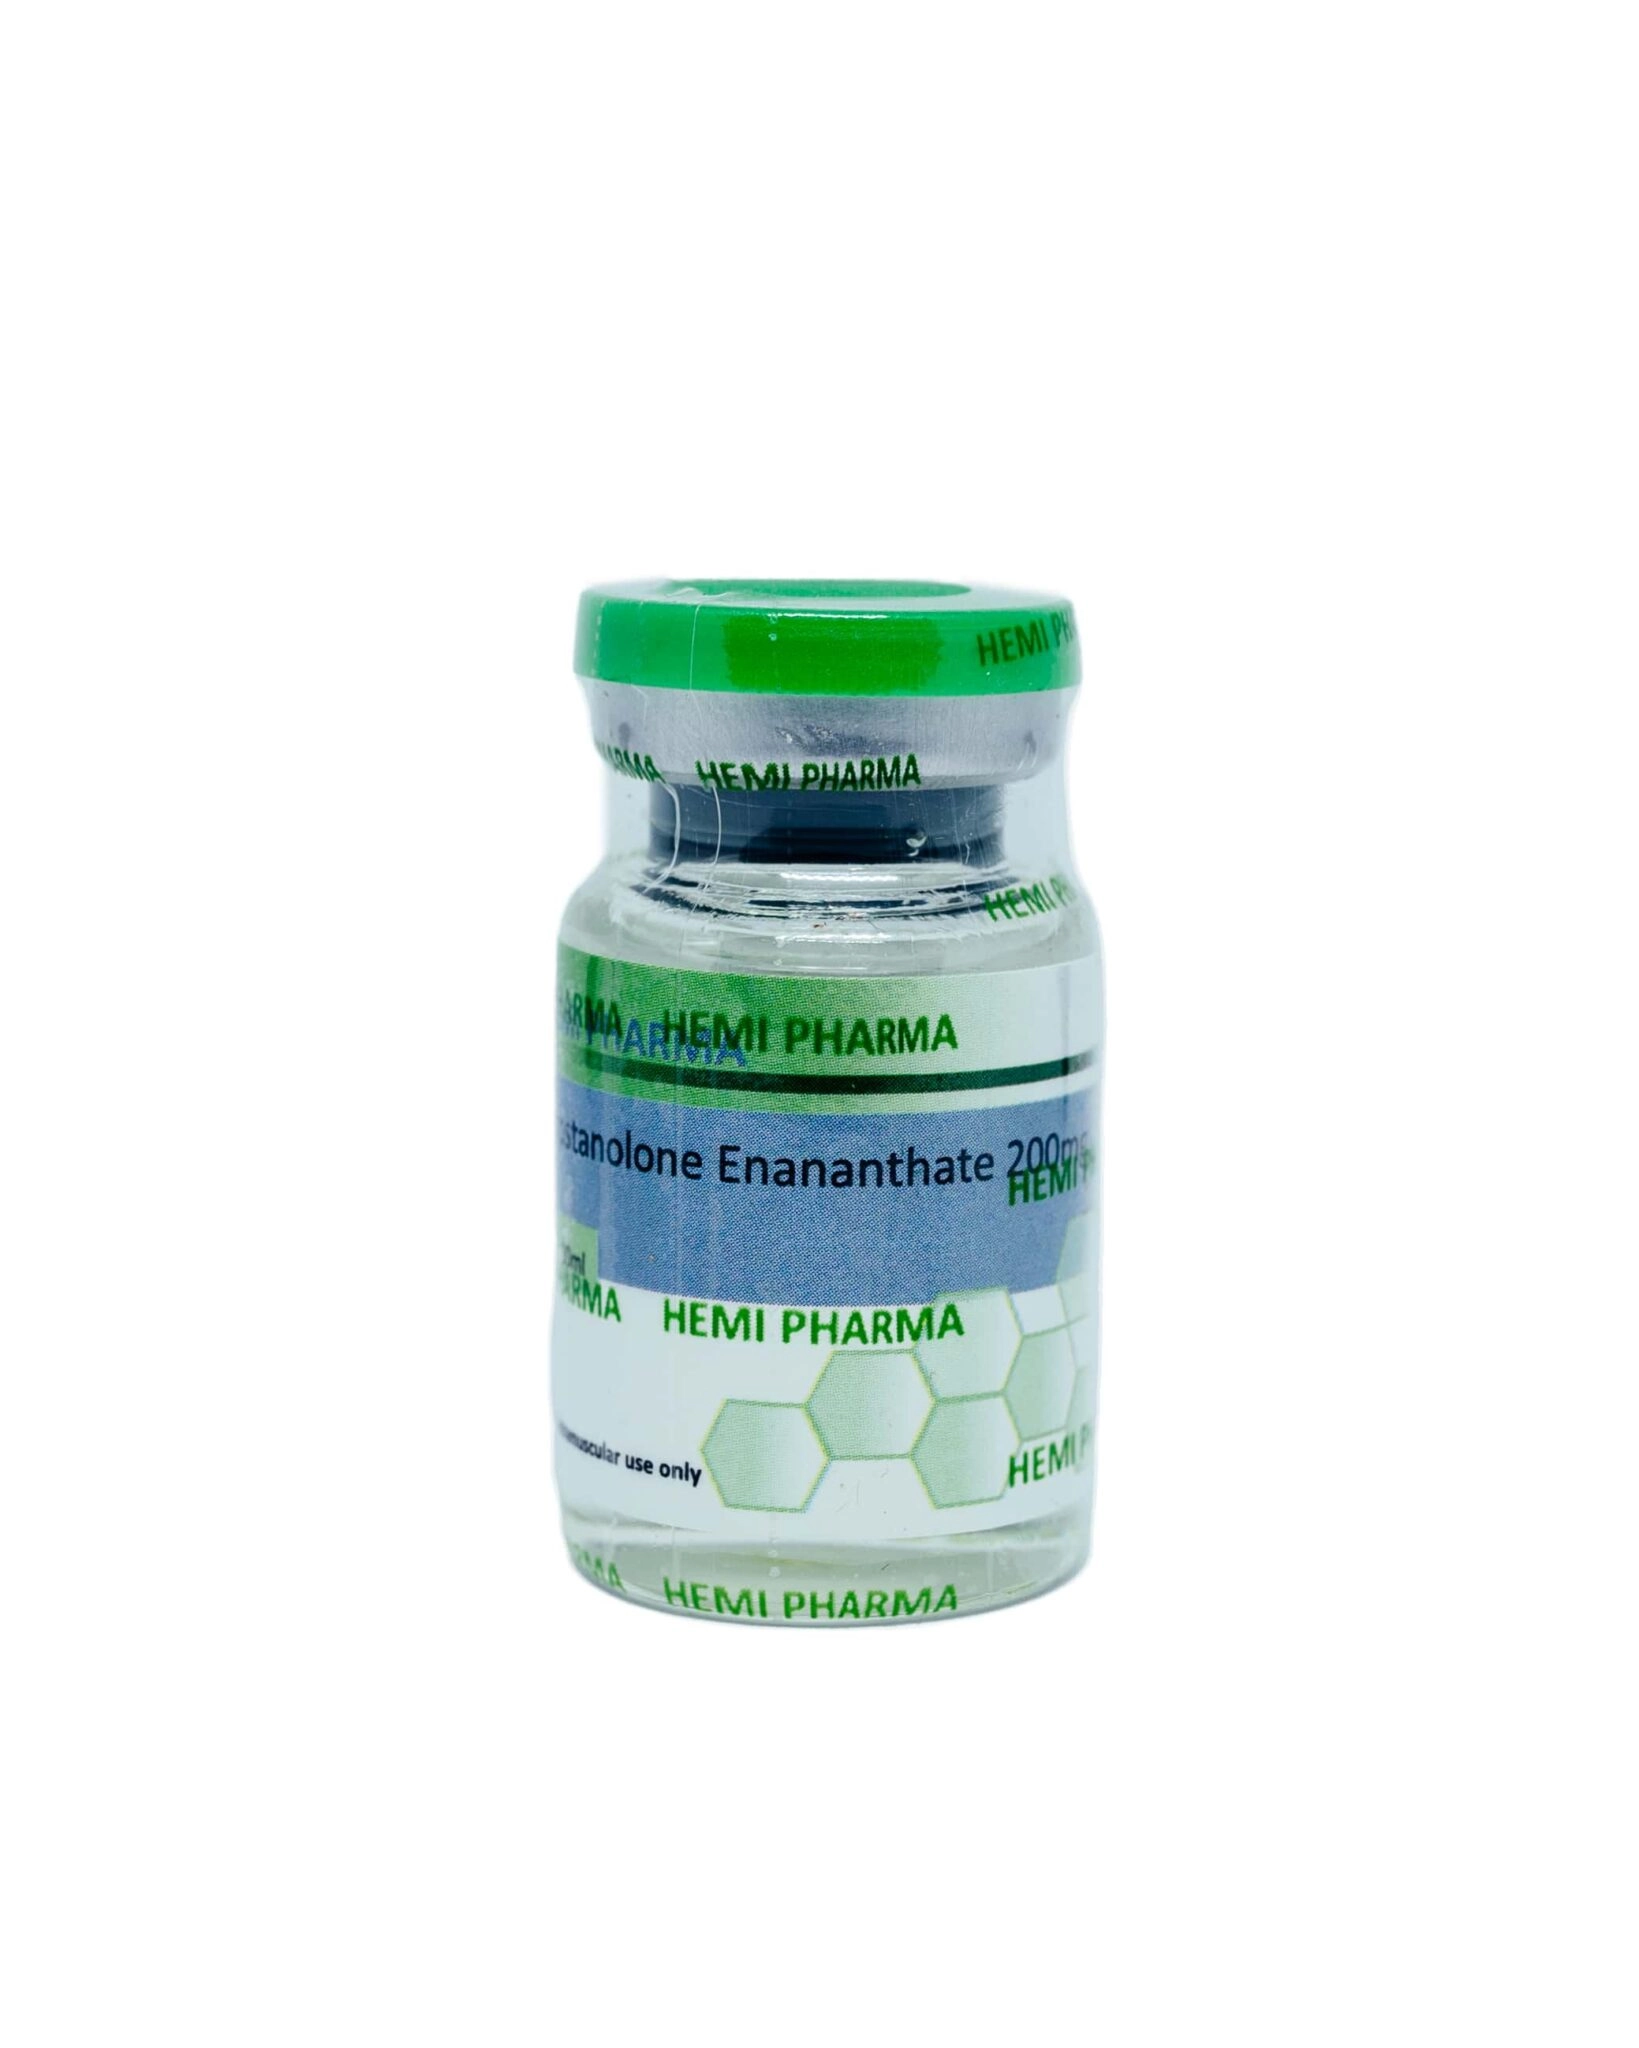 Drostanolone Enananthate 200 